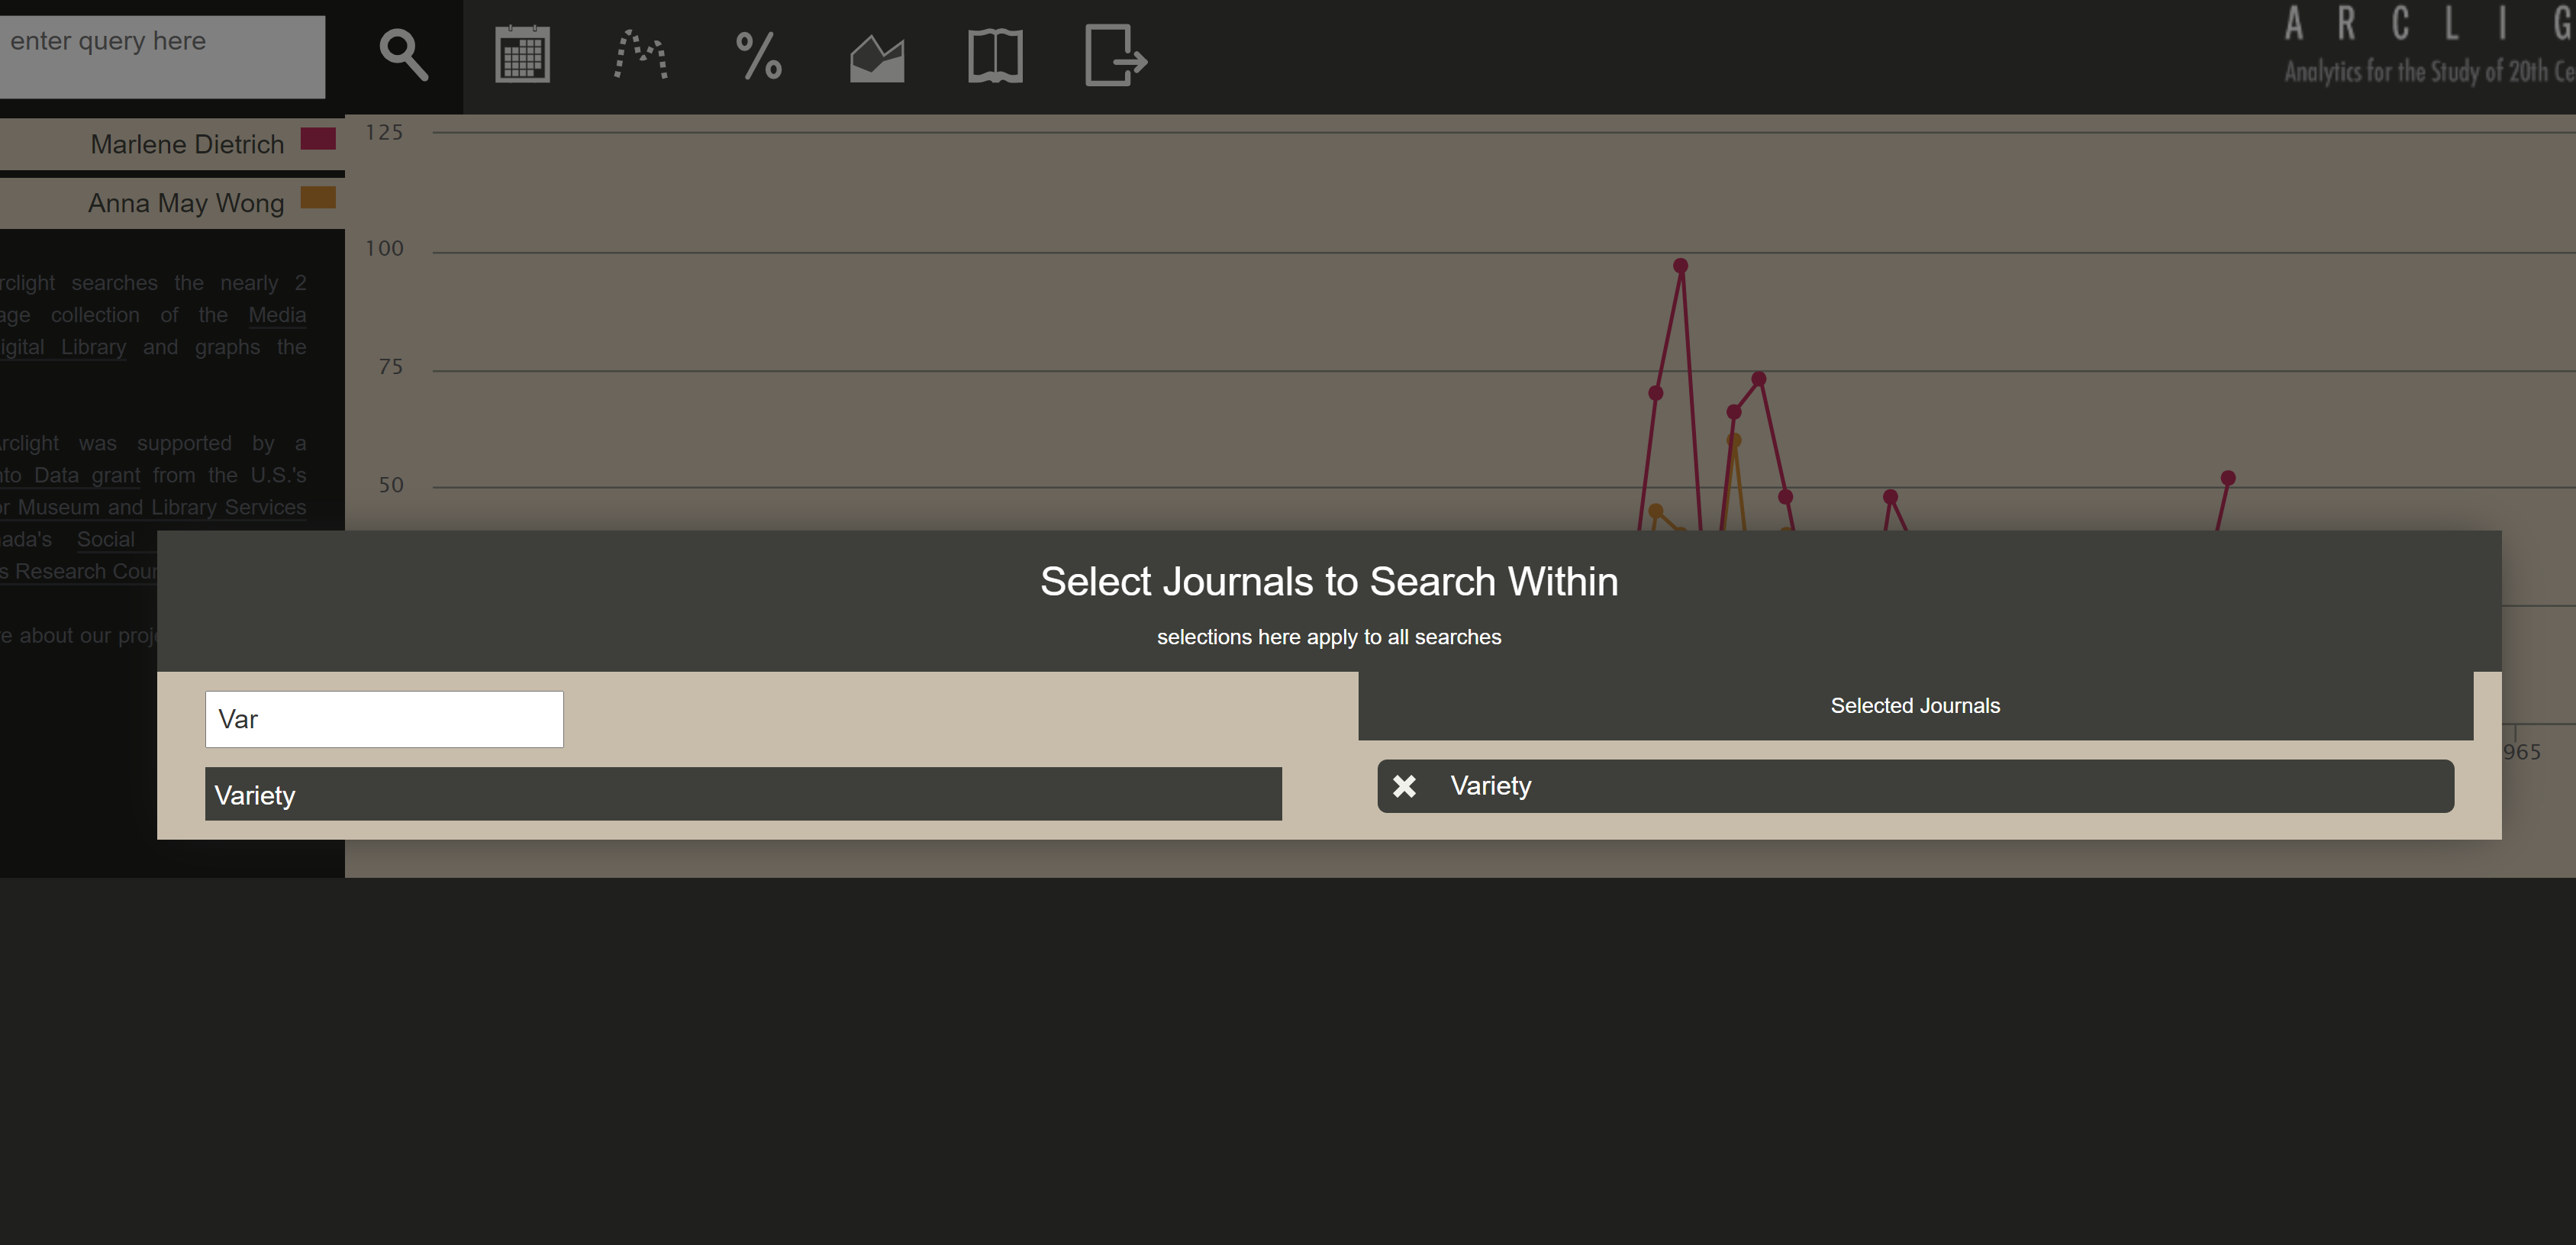 screenshot of Arclight search by journal selection menu